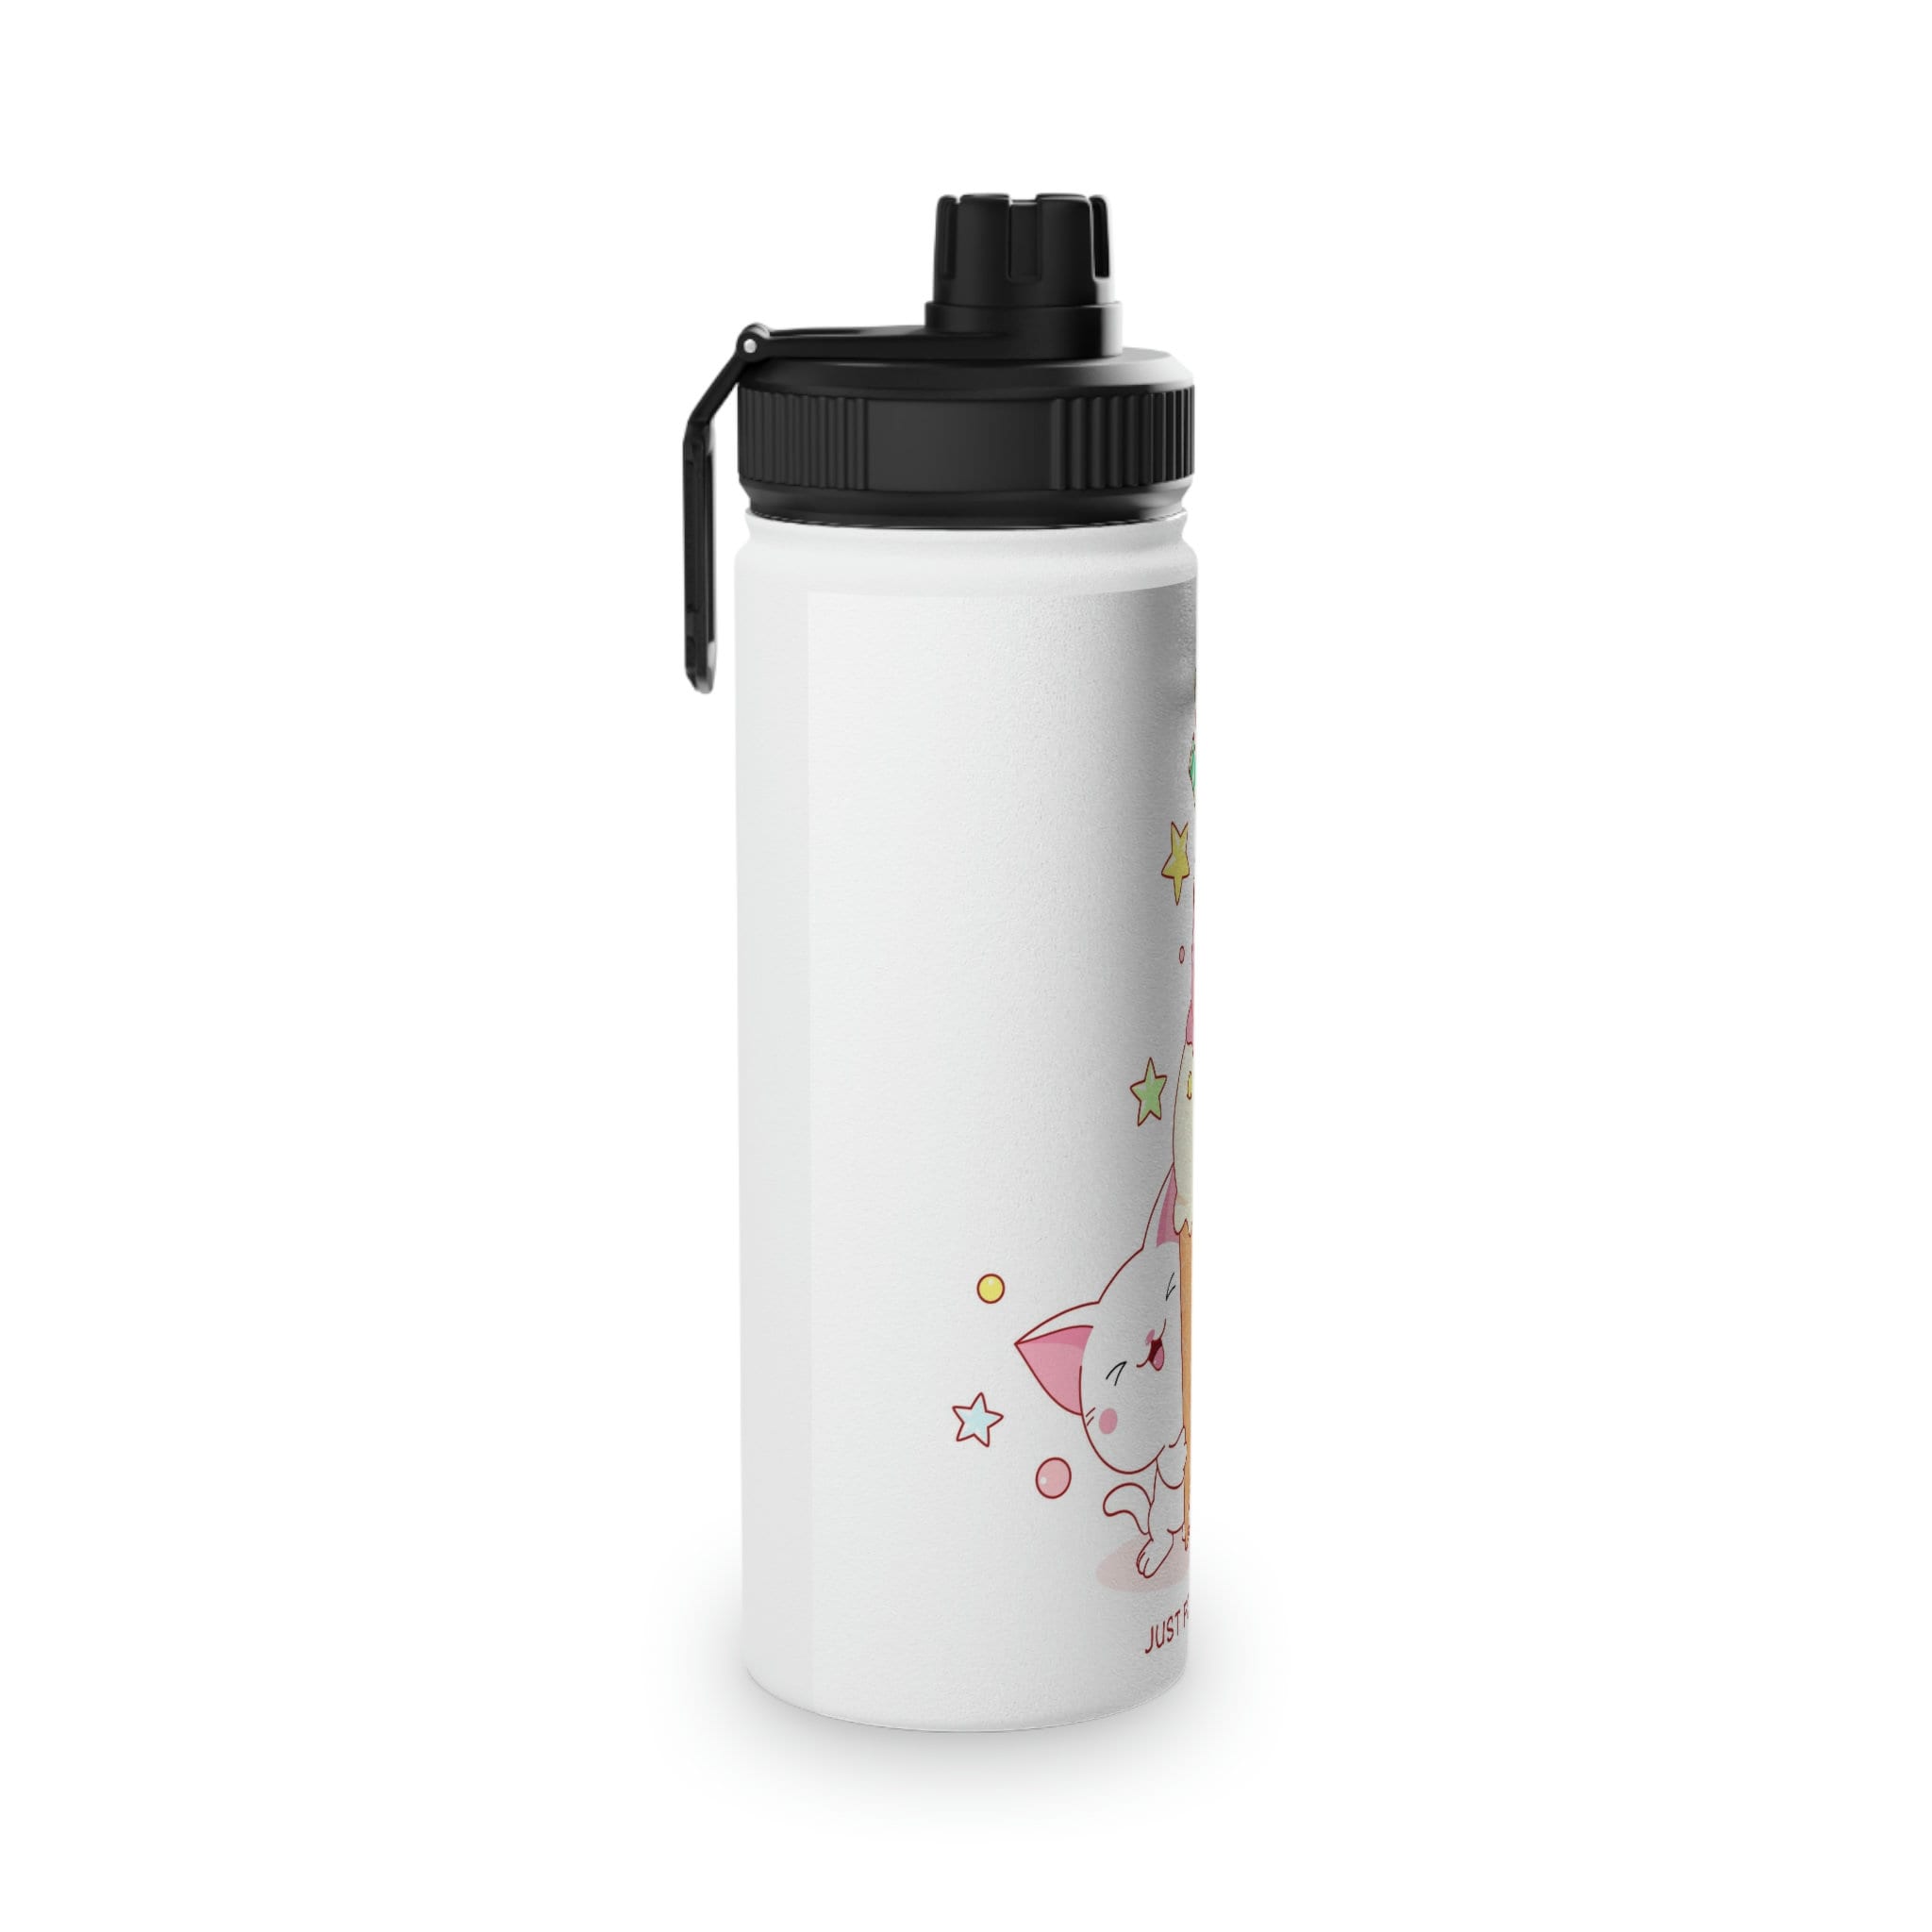 Cute Kittens Ice Cream Just for You Kawaii Thermoses, Stainless Steel Water  Bottle, Sports Lid, Gift for Her, Gift for Mom, Shaker Bottle 